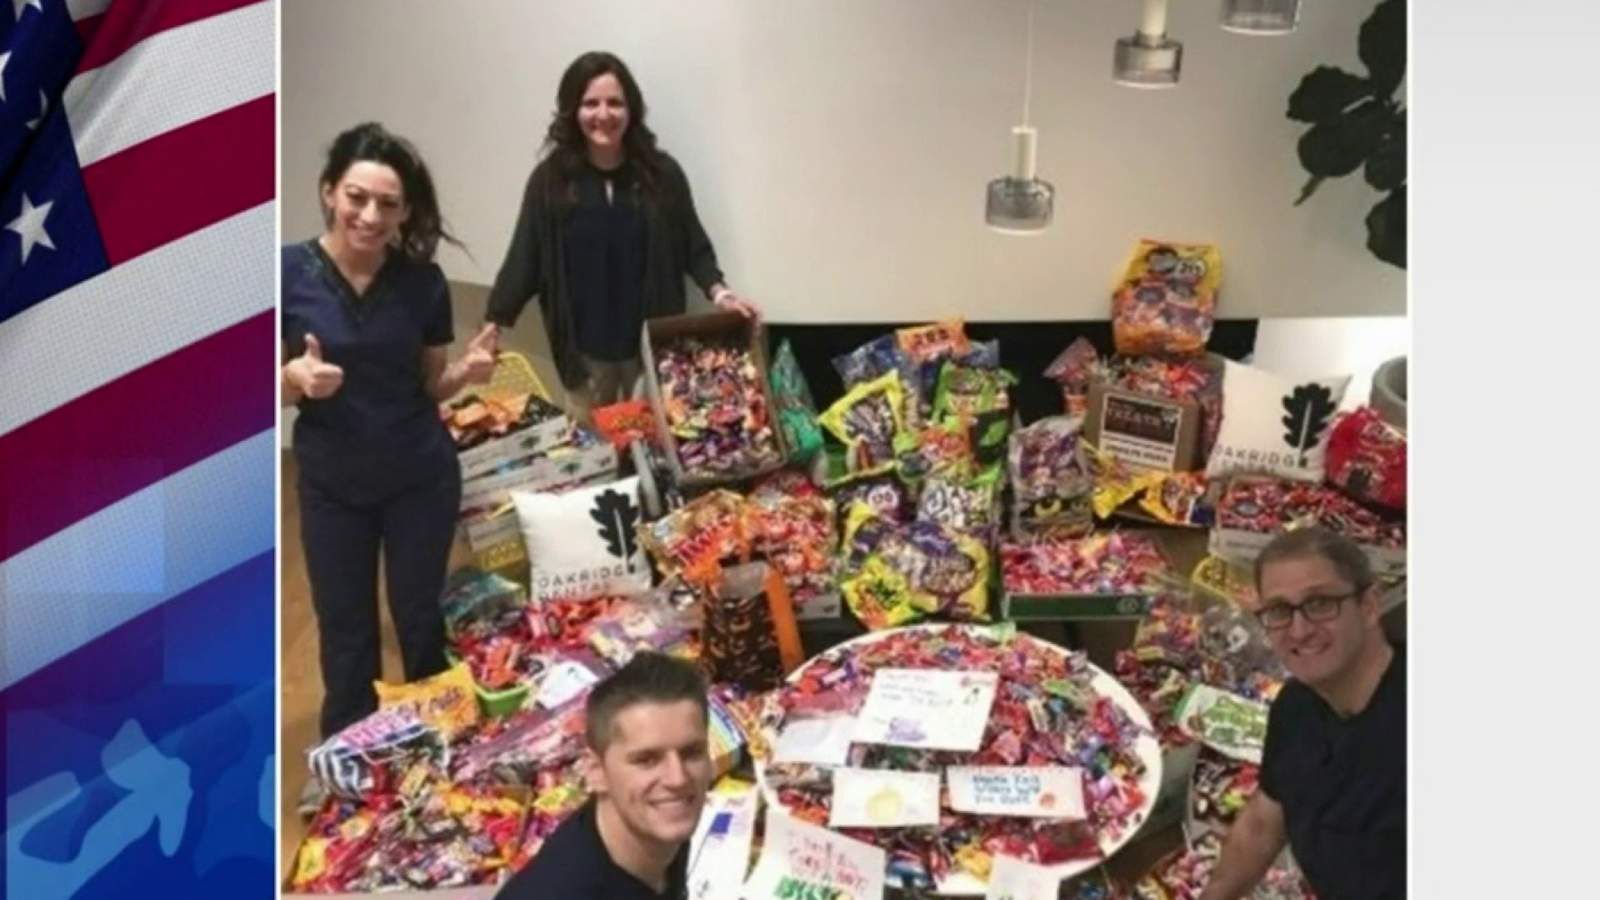 Rochester Hills dental office collects 1,000 pounds of candy for troops